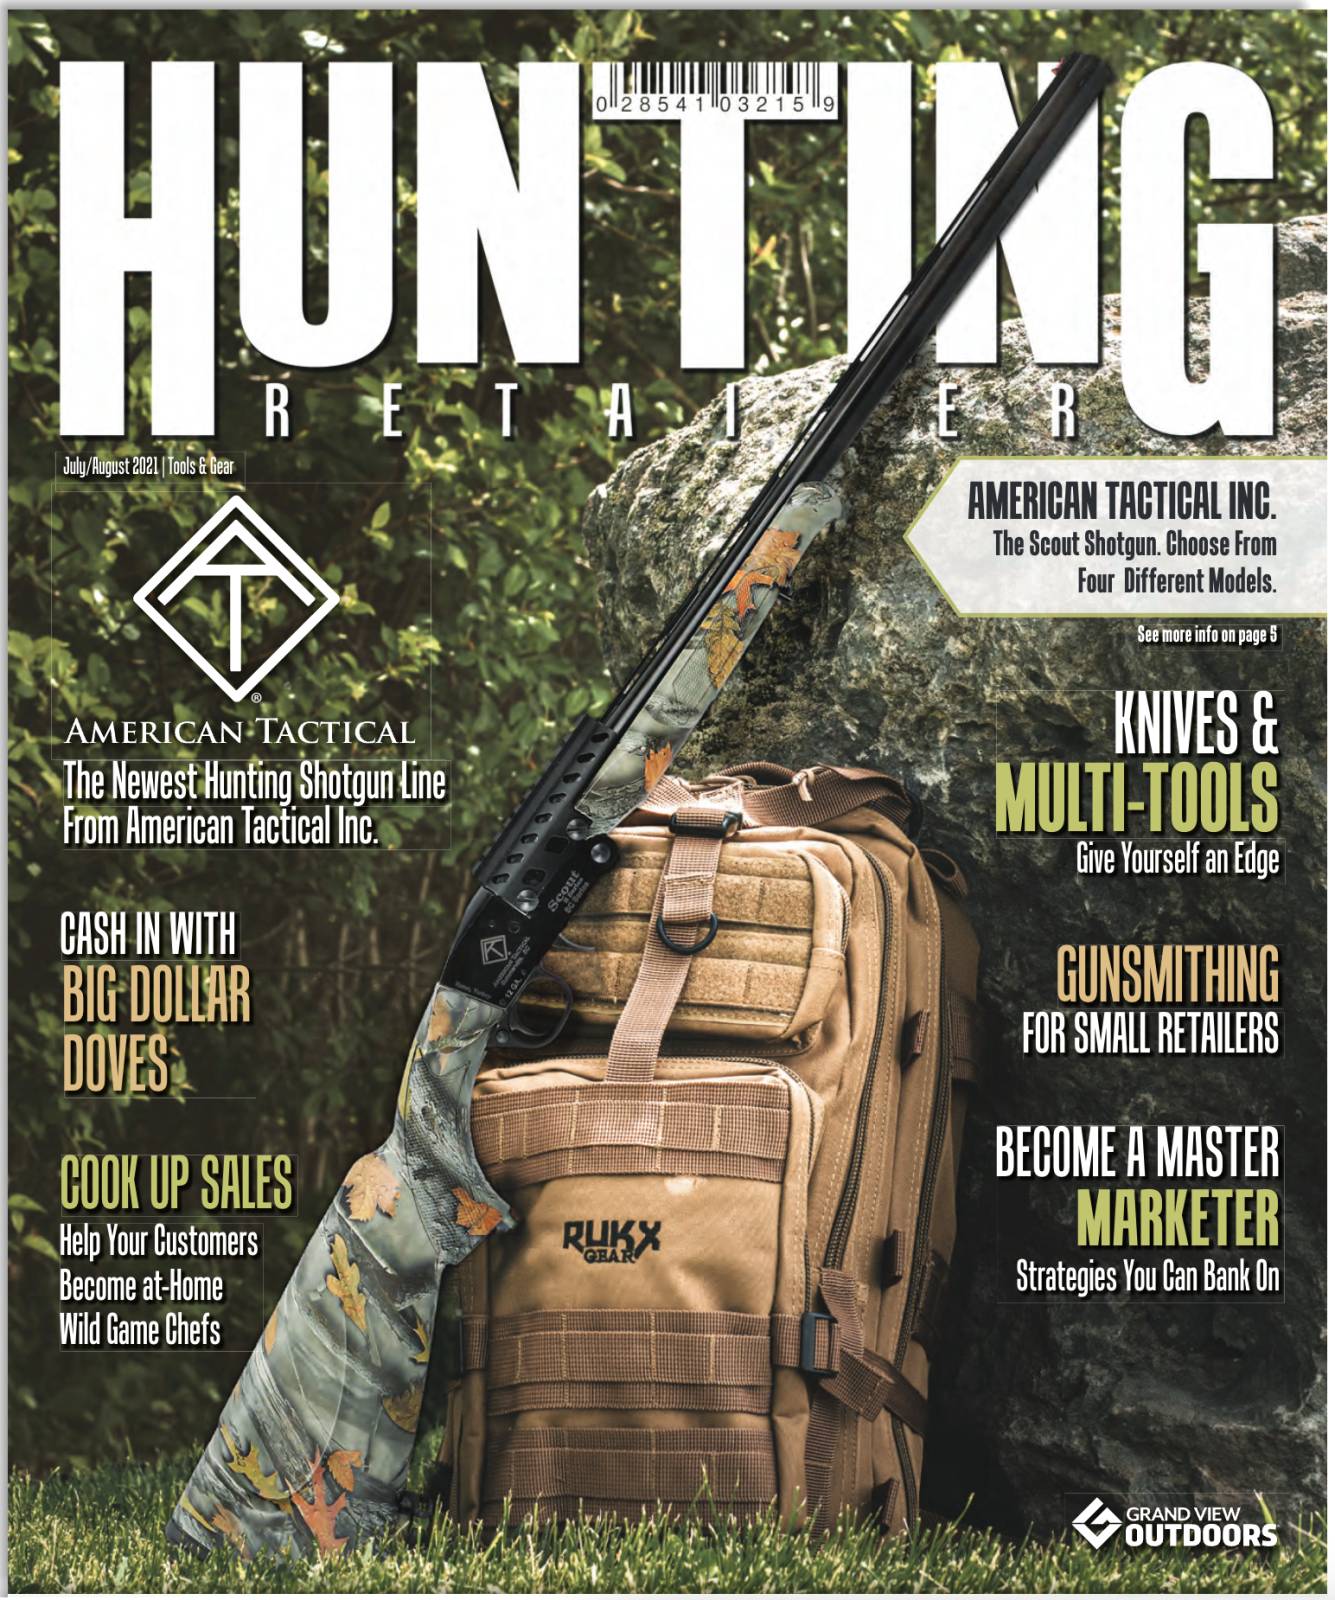 Inside the July/August 2021 E-Zine of Hunting Retailer